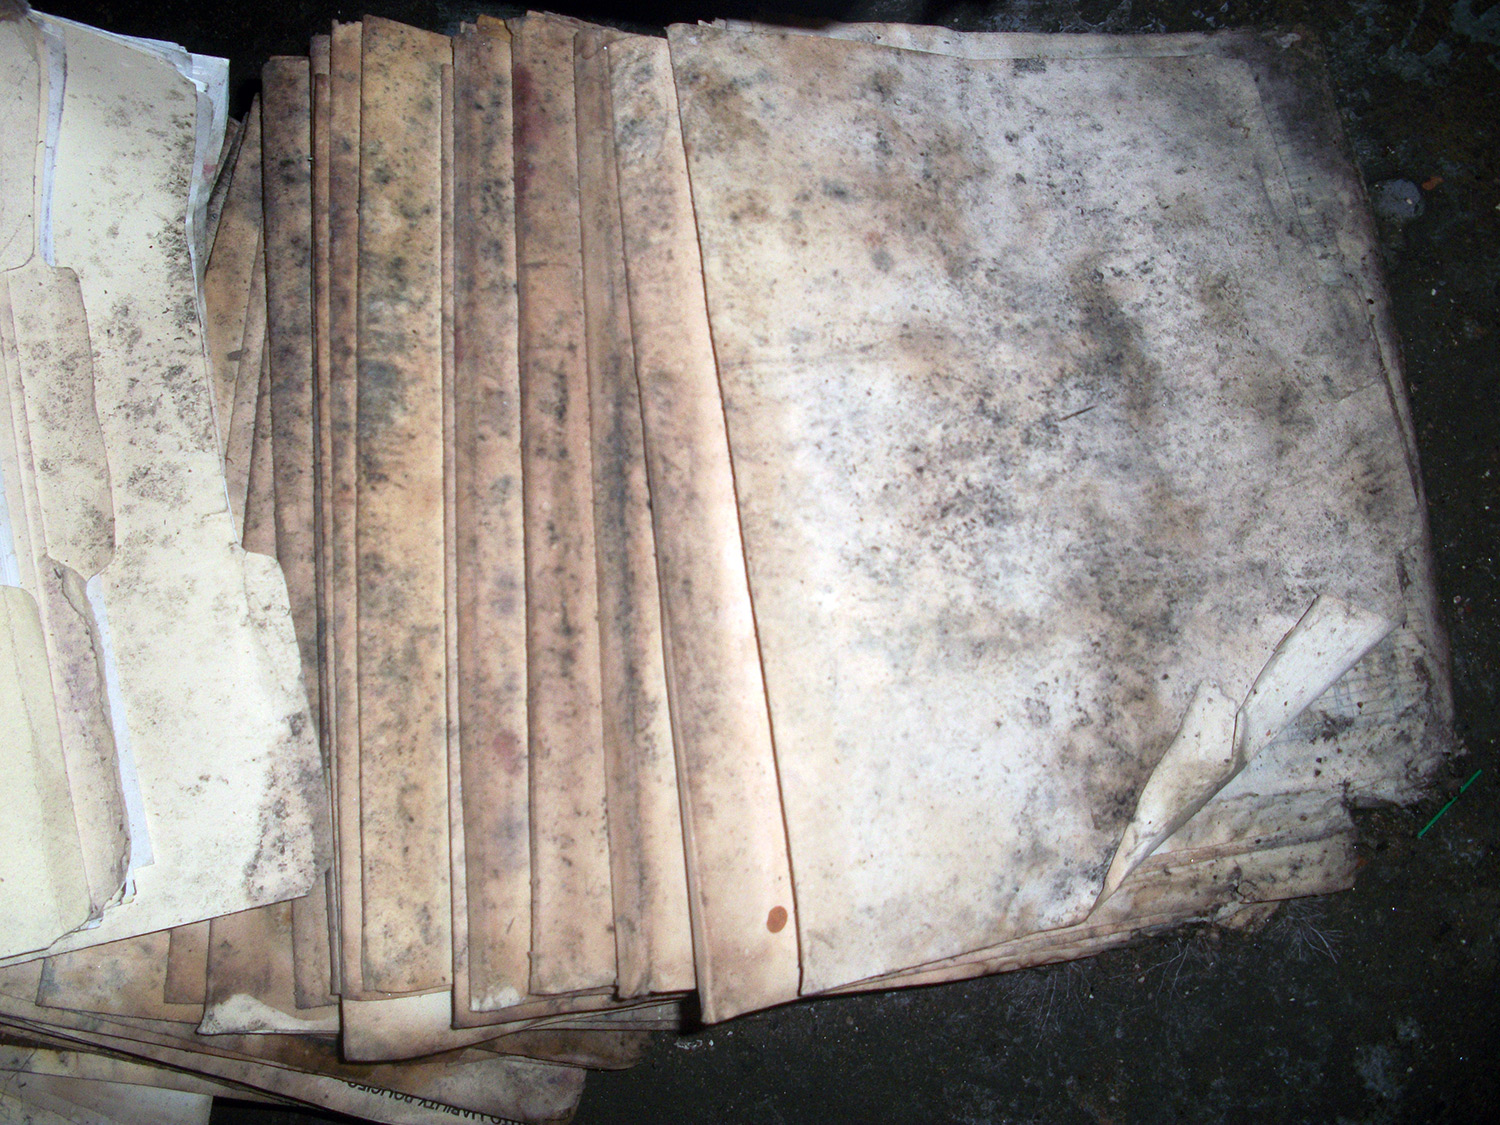 Water and mold damaged paper folders and documents scattered on the wet floor